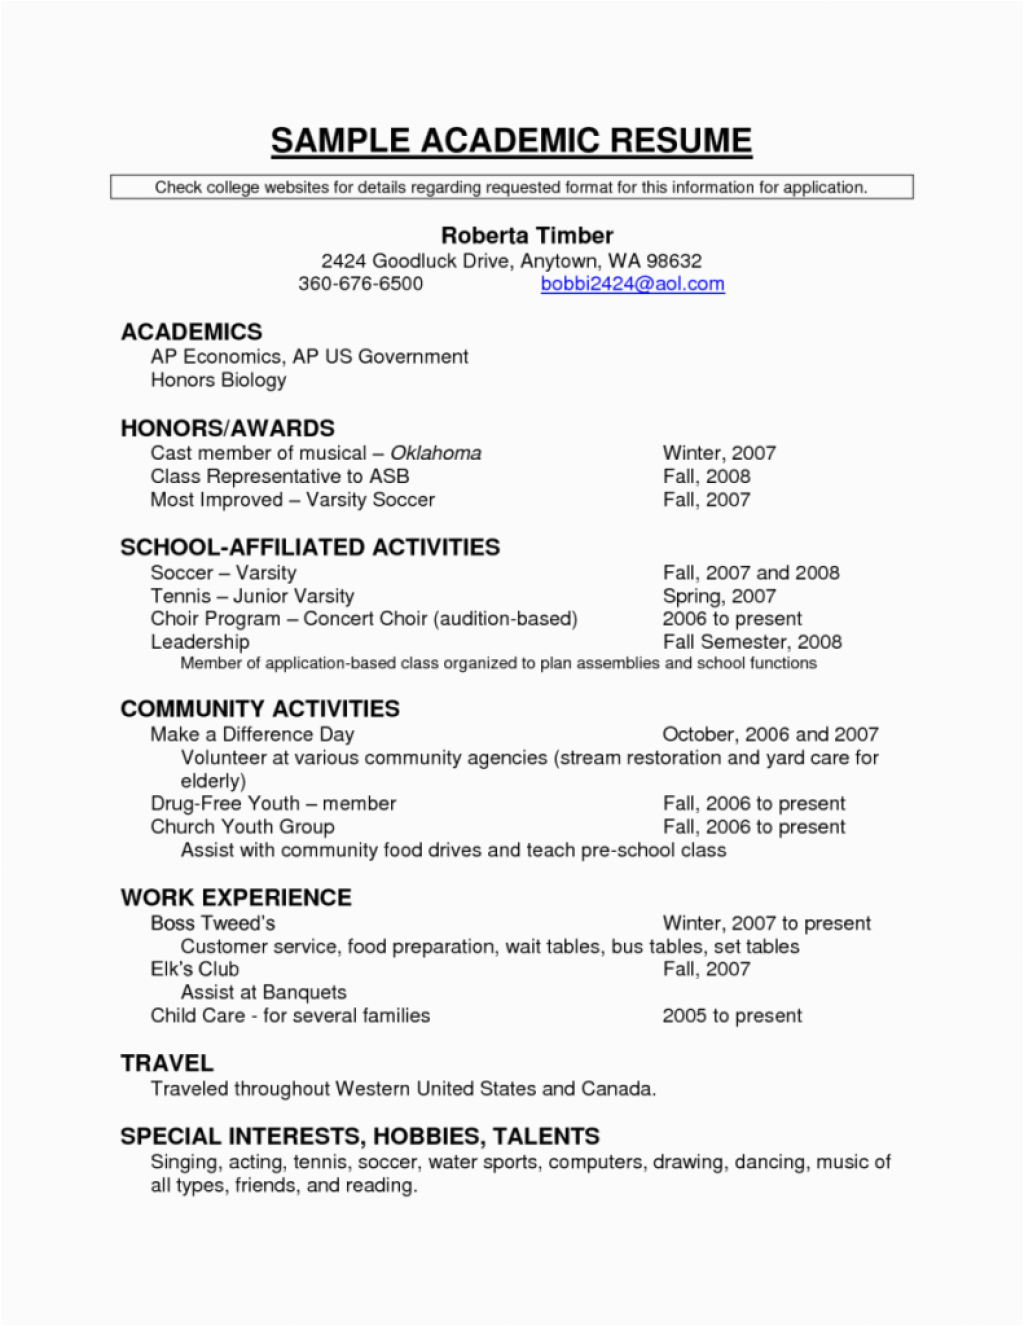 Sample Resume with Awards and Recognition 8 Beautiful Resume Awards Section Example for Example